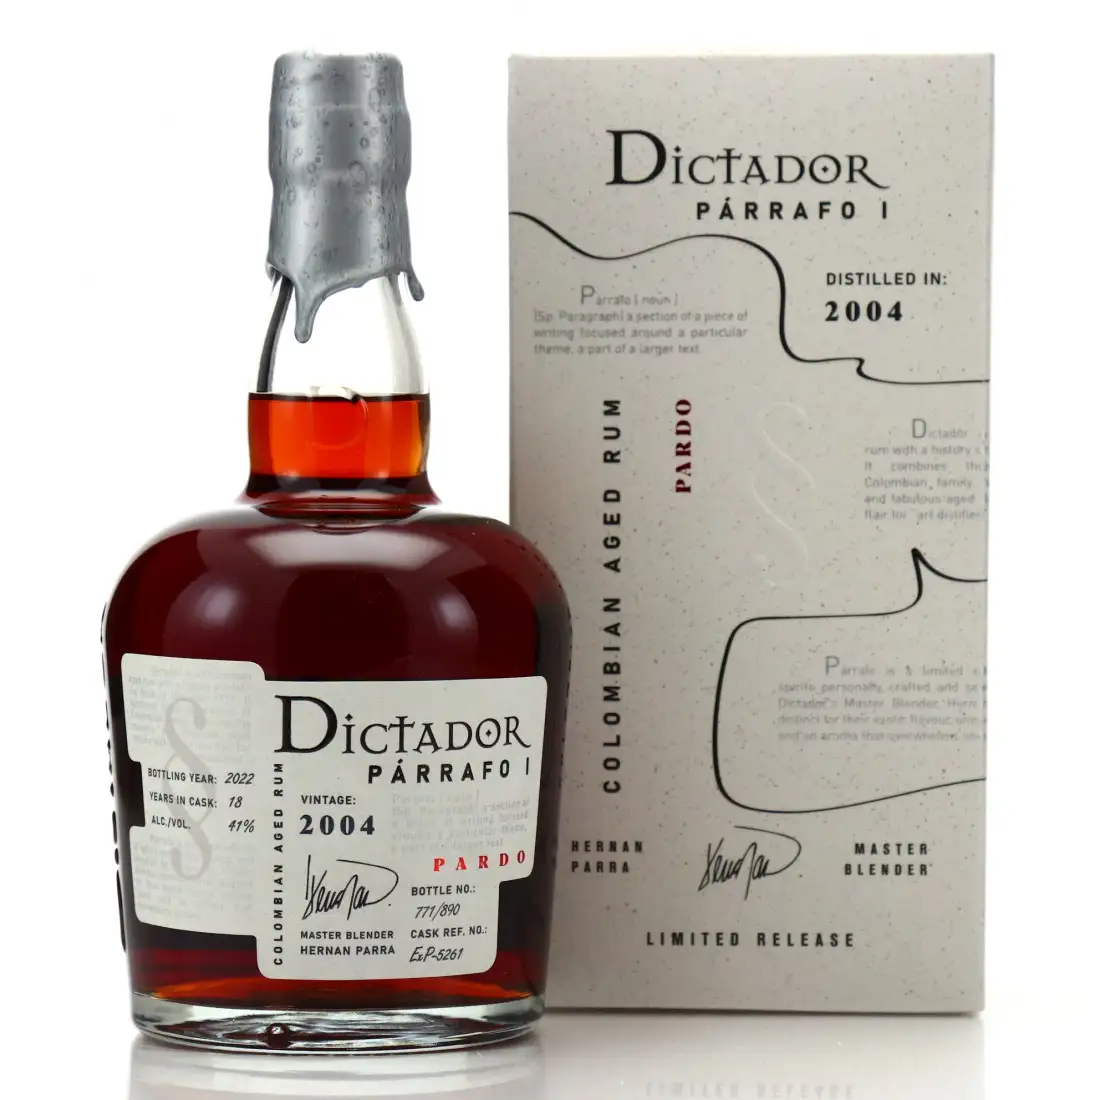 Image of the front of the bottle of the rum Dictador Párrafo I Pardo